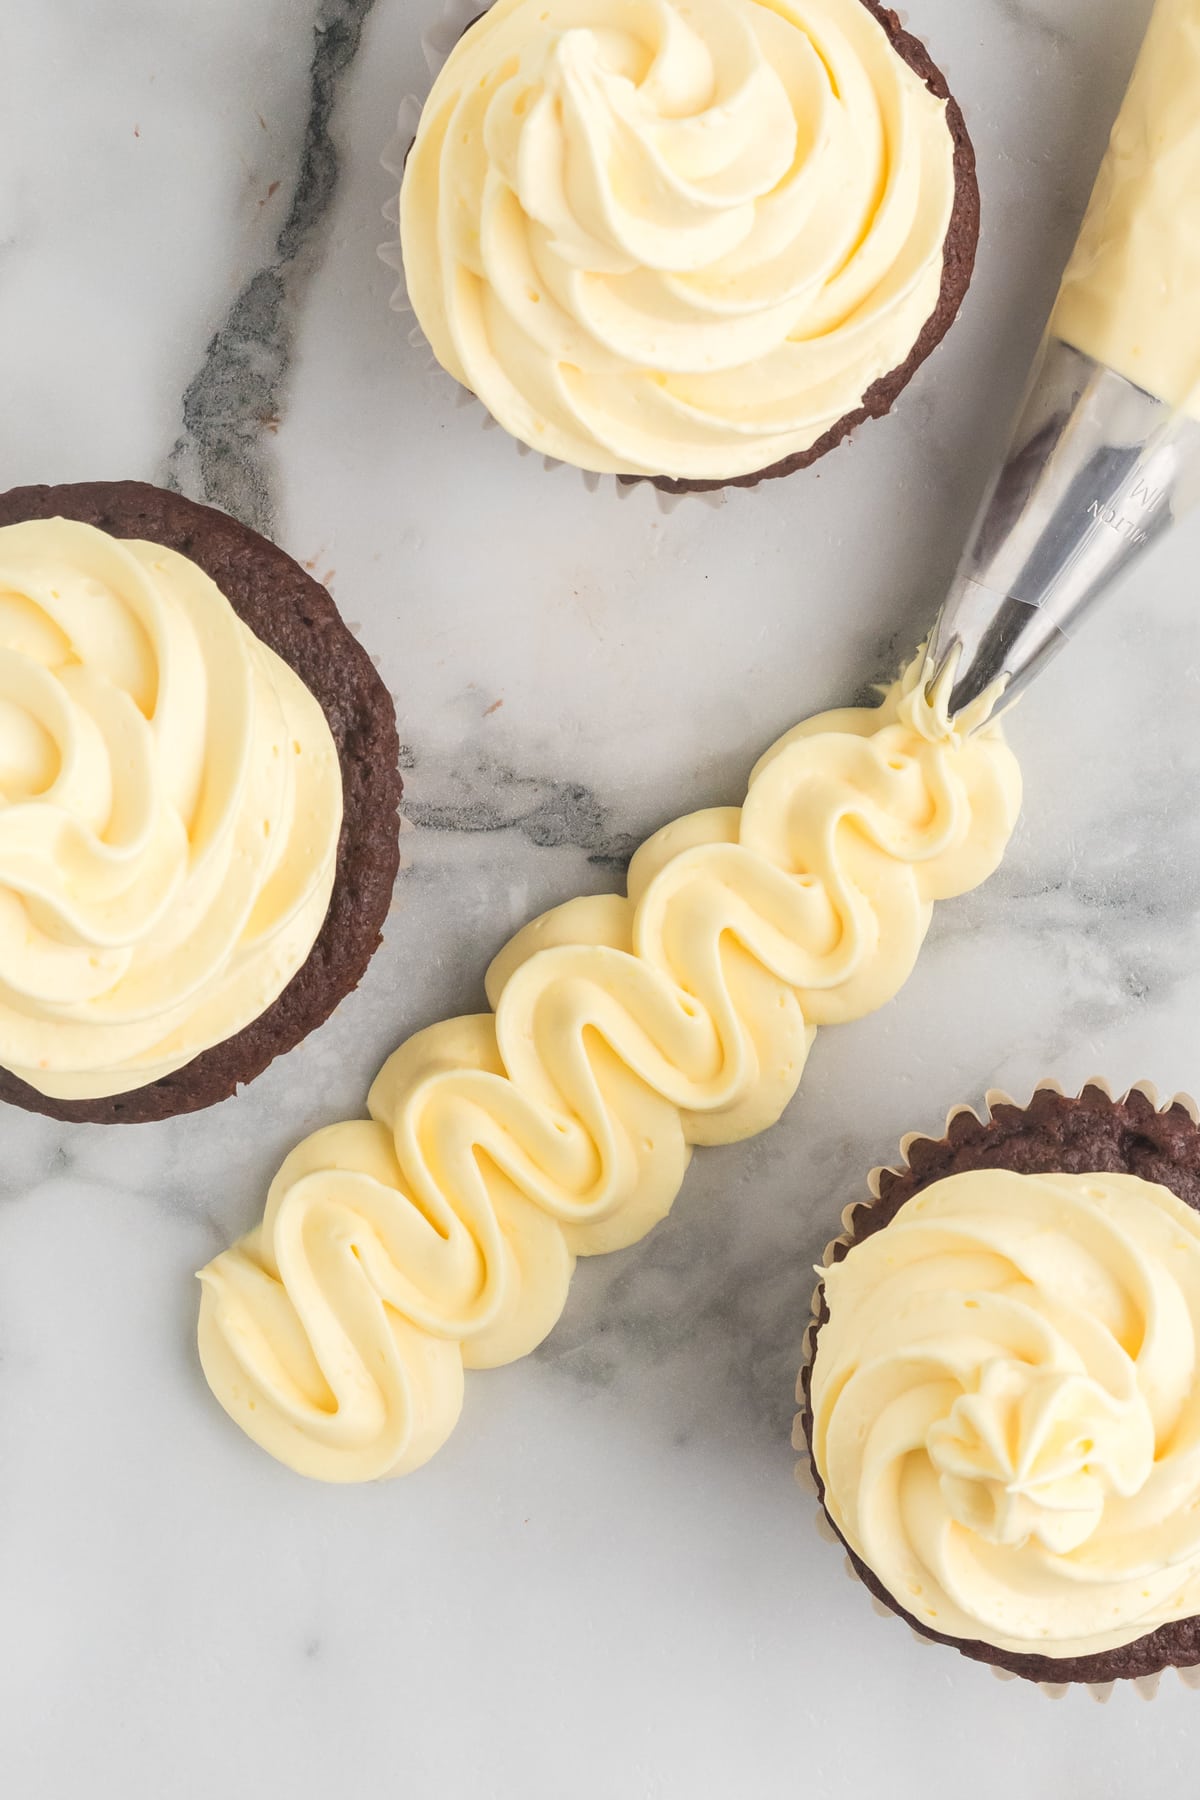 Cool Whip Frosting piped in a squiggly line on a marble countertop surrounded by cupcakes.